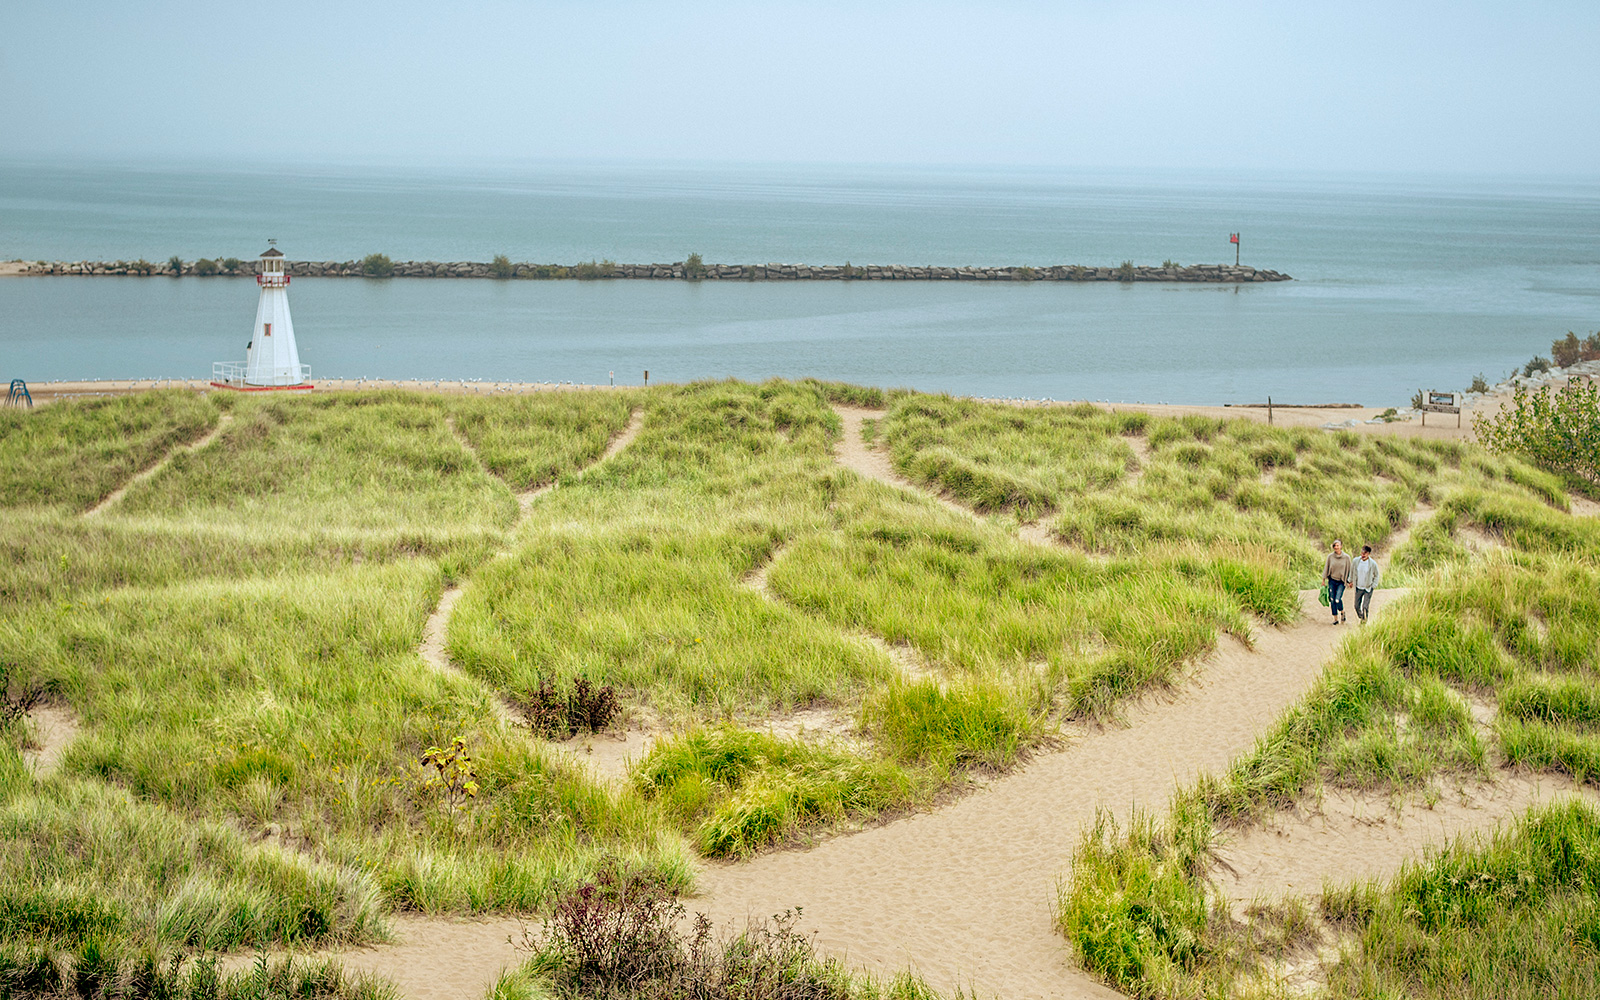  A couple walks on a sandy path amidst dune grass with Lake Michigan behind